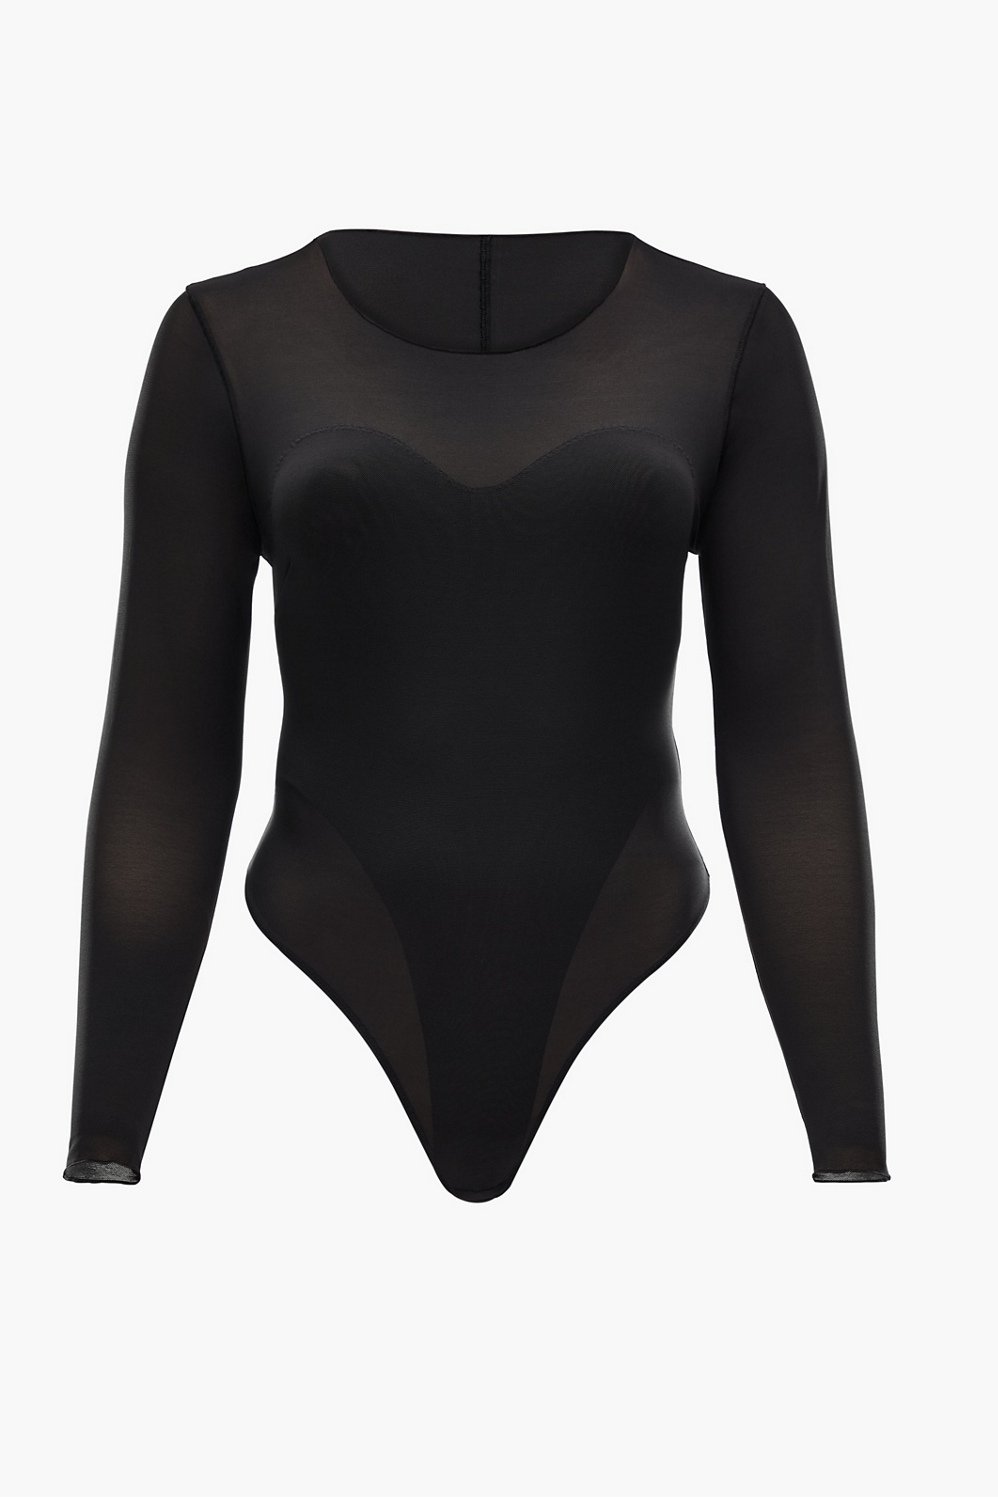 Fabletics Jaymee Mesh Long-Sleeve Top Size L - $34 - From Clintonia